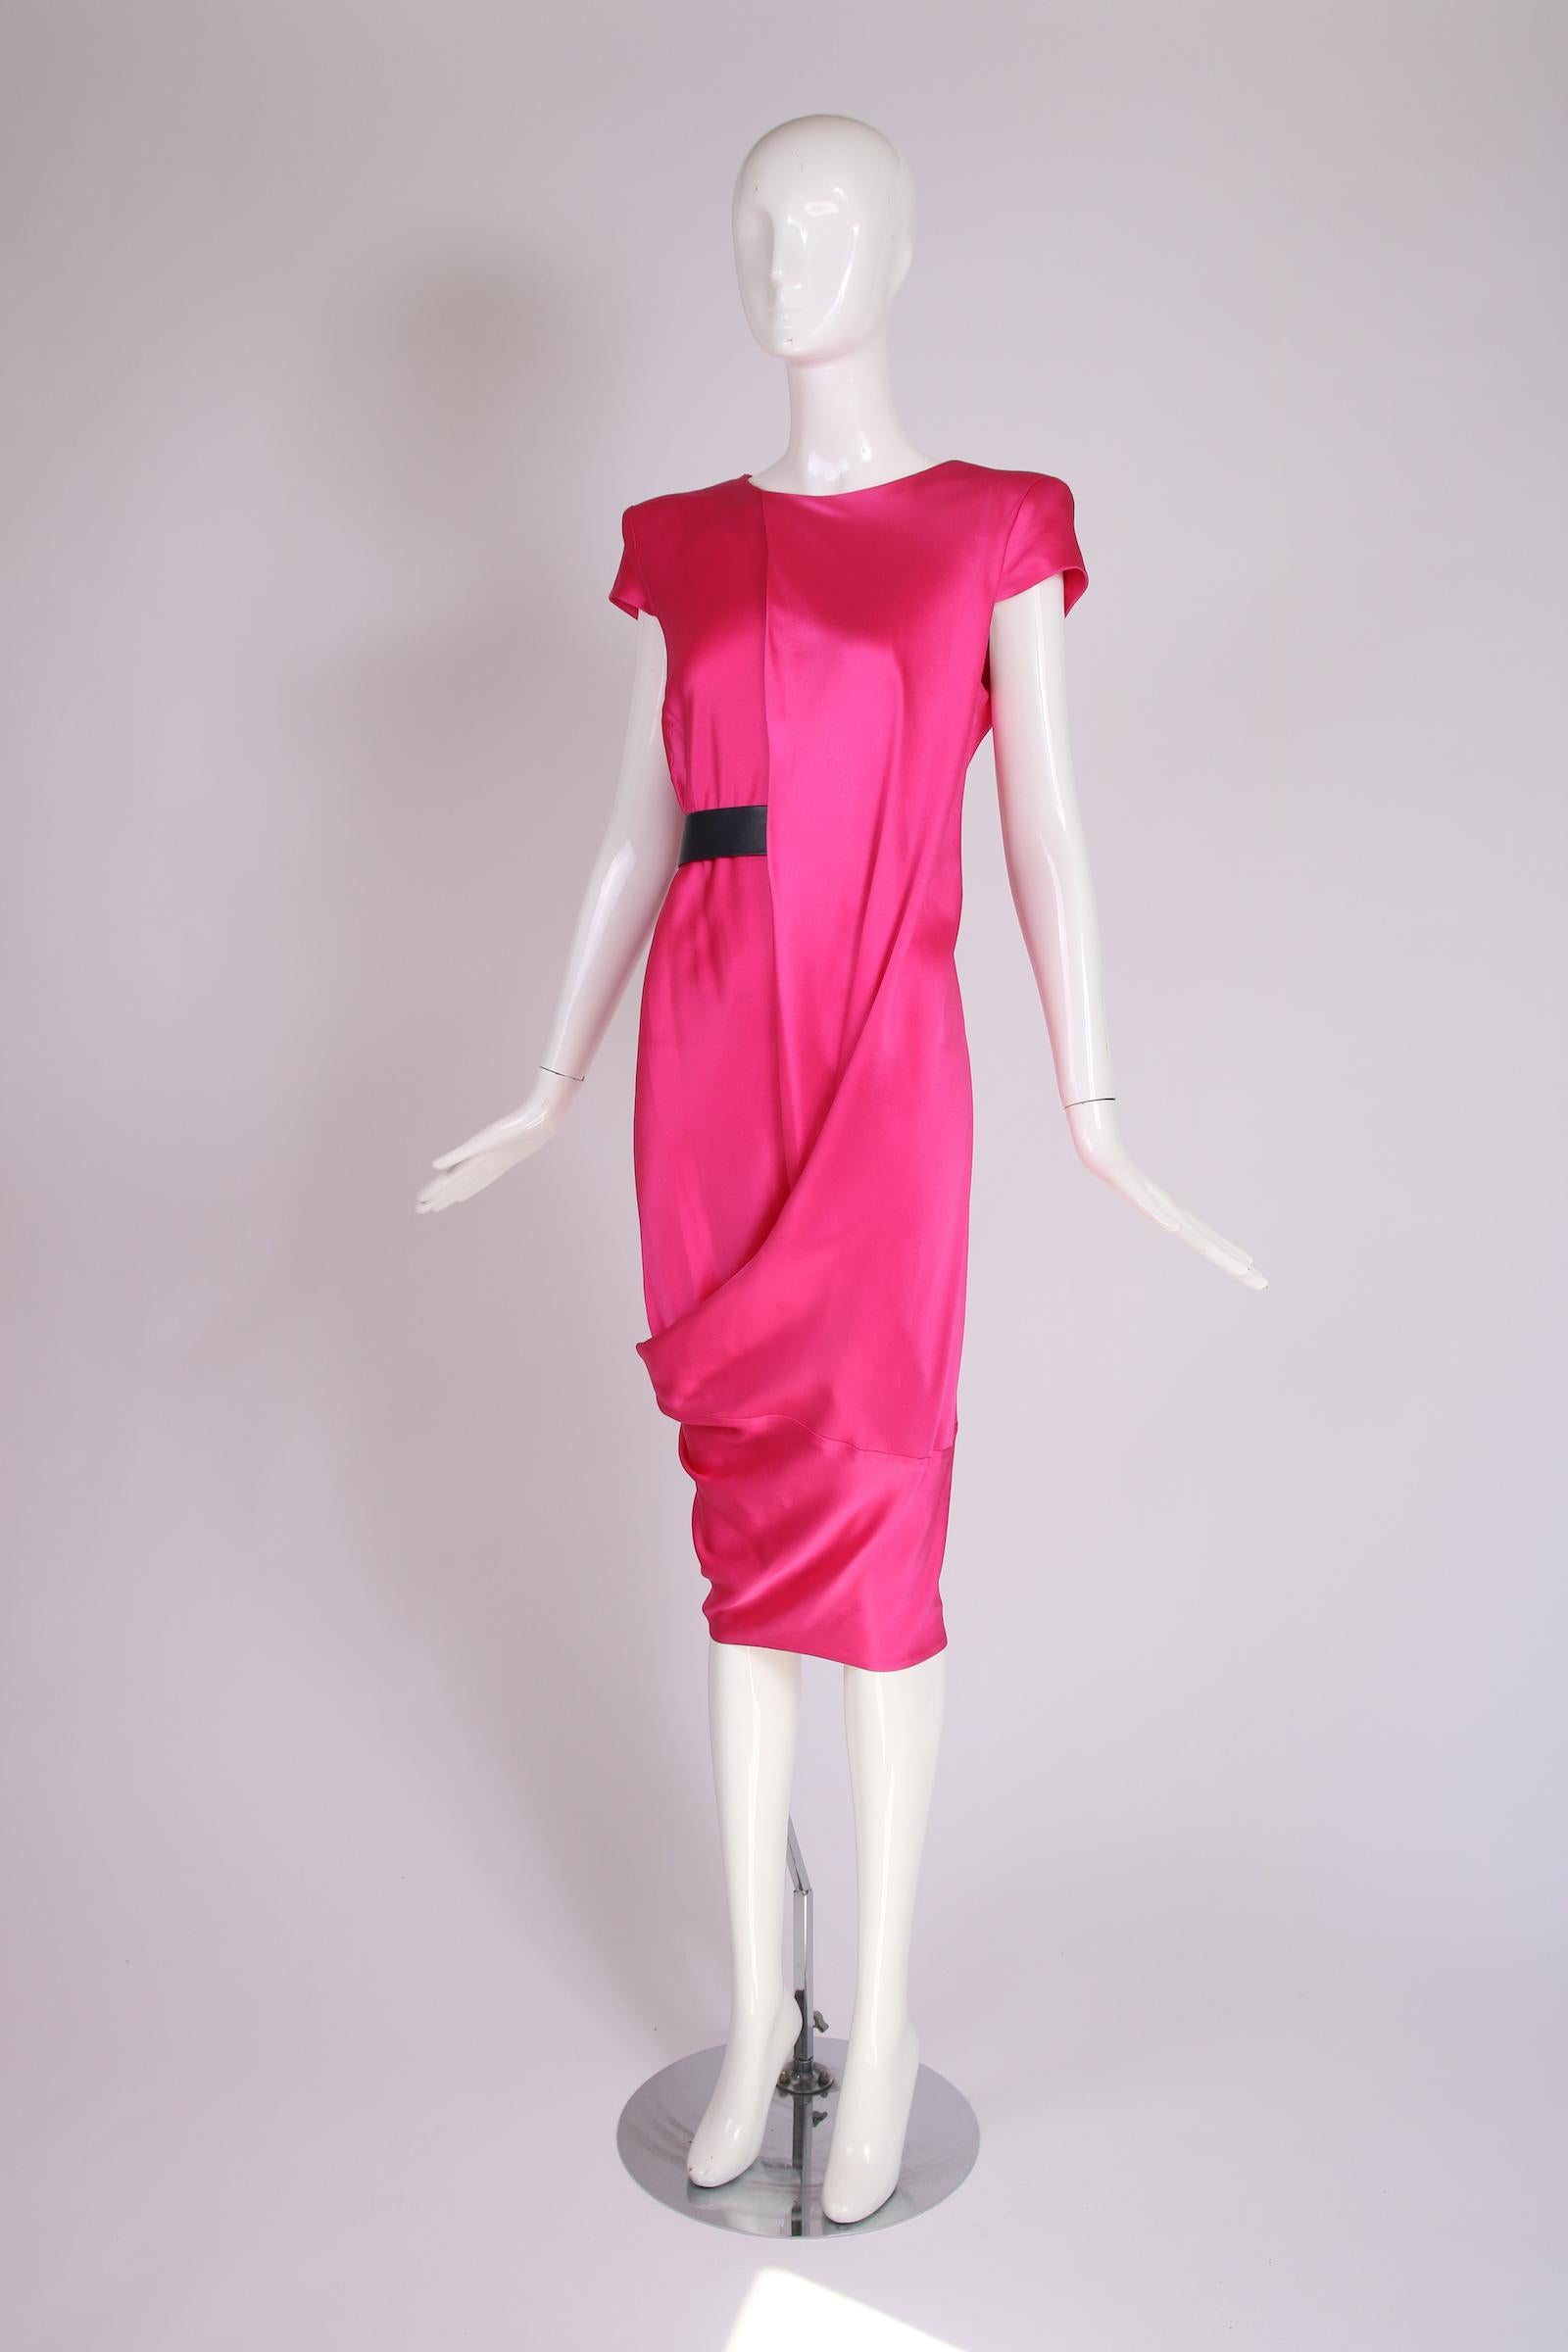 2007 Alexander McQueen pink 100% silk short-sleeved draped asymmetric dress w/hole for belt. Size 44, in very good to excellent condition with some scattered faint marks on the fabric - does NOT come with belt. 

Bust: 36-38